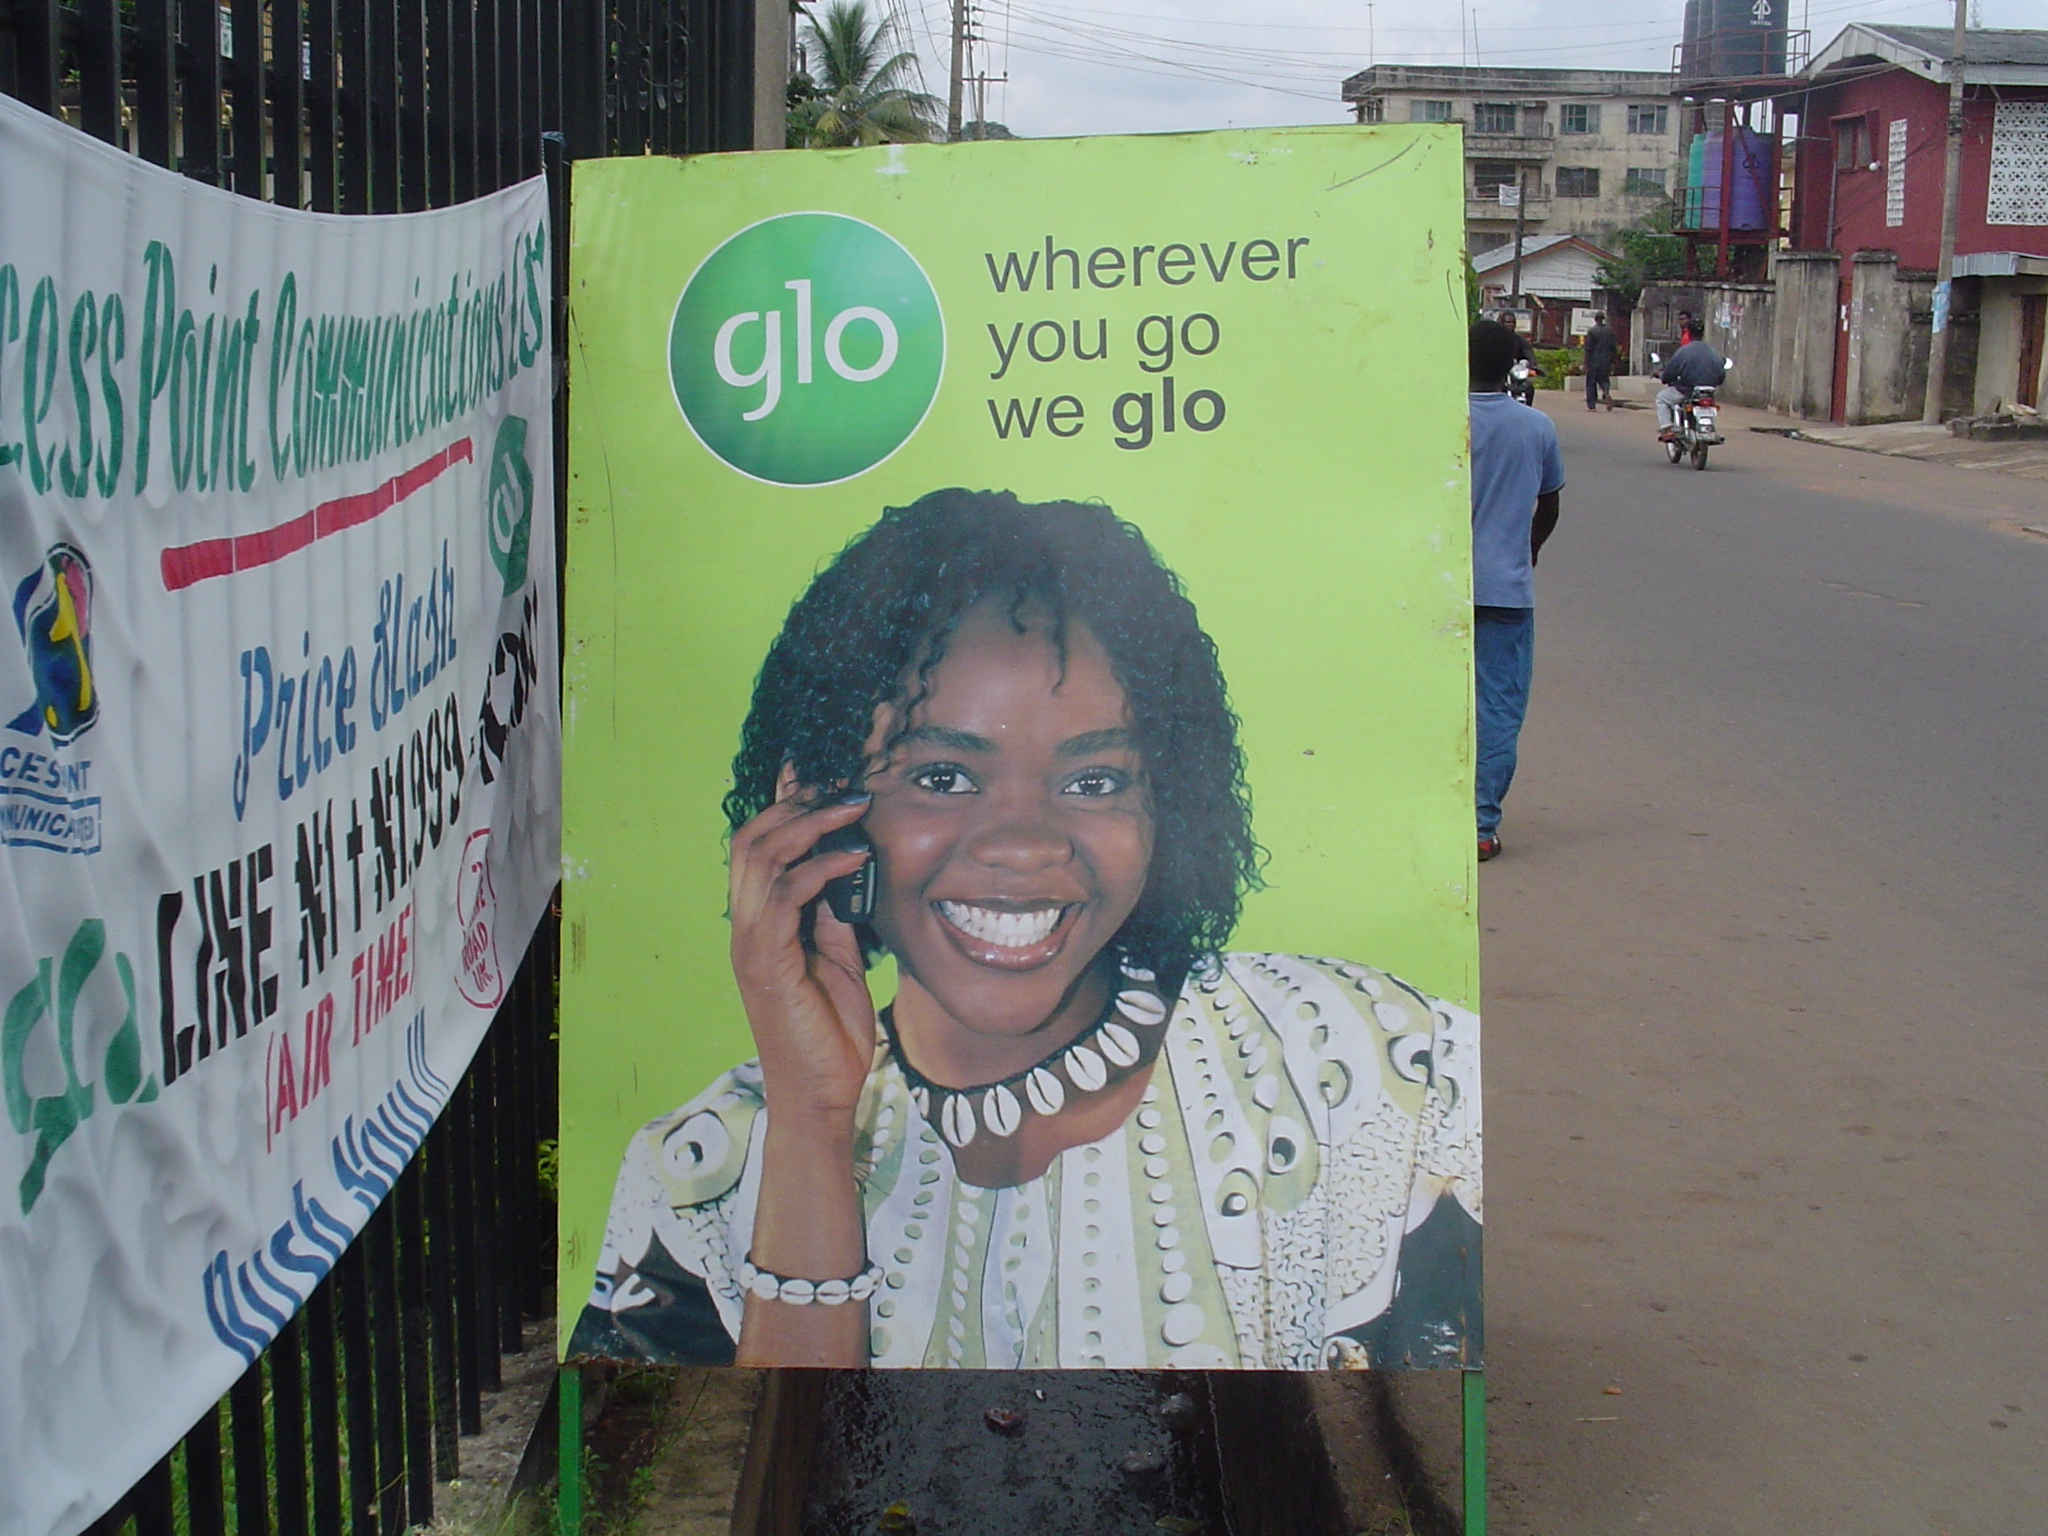 Cell phone company ad in Nigeria